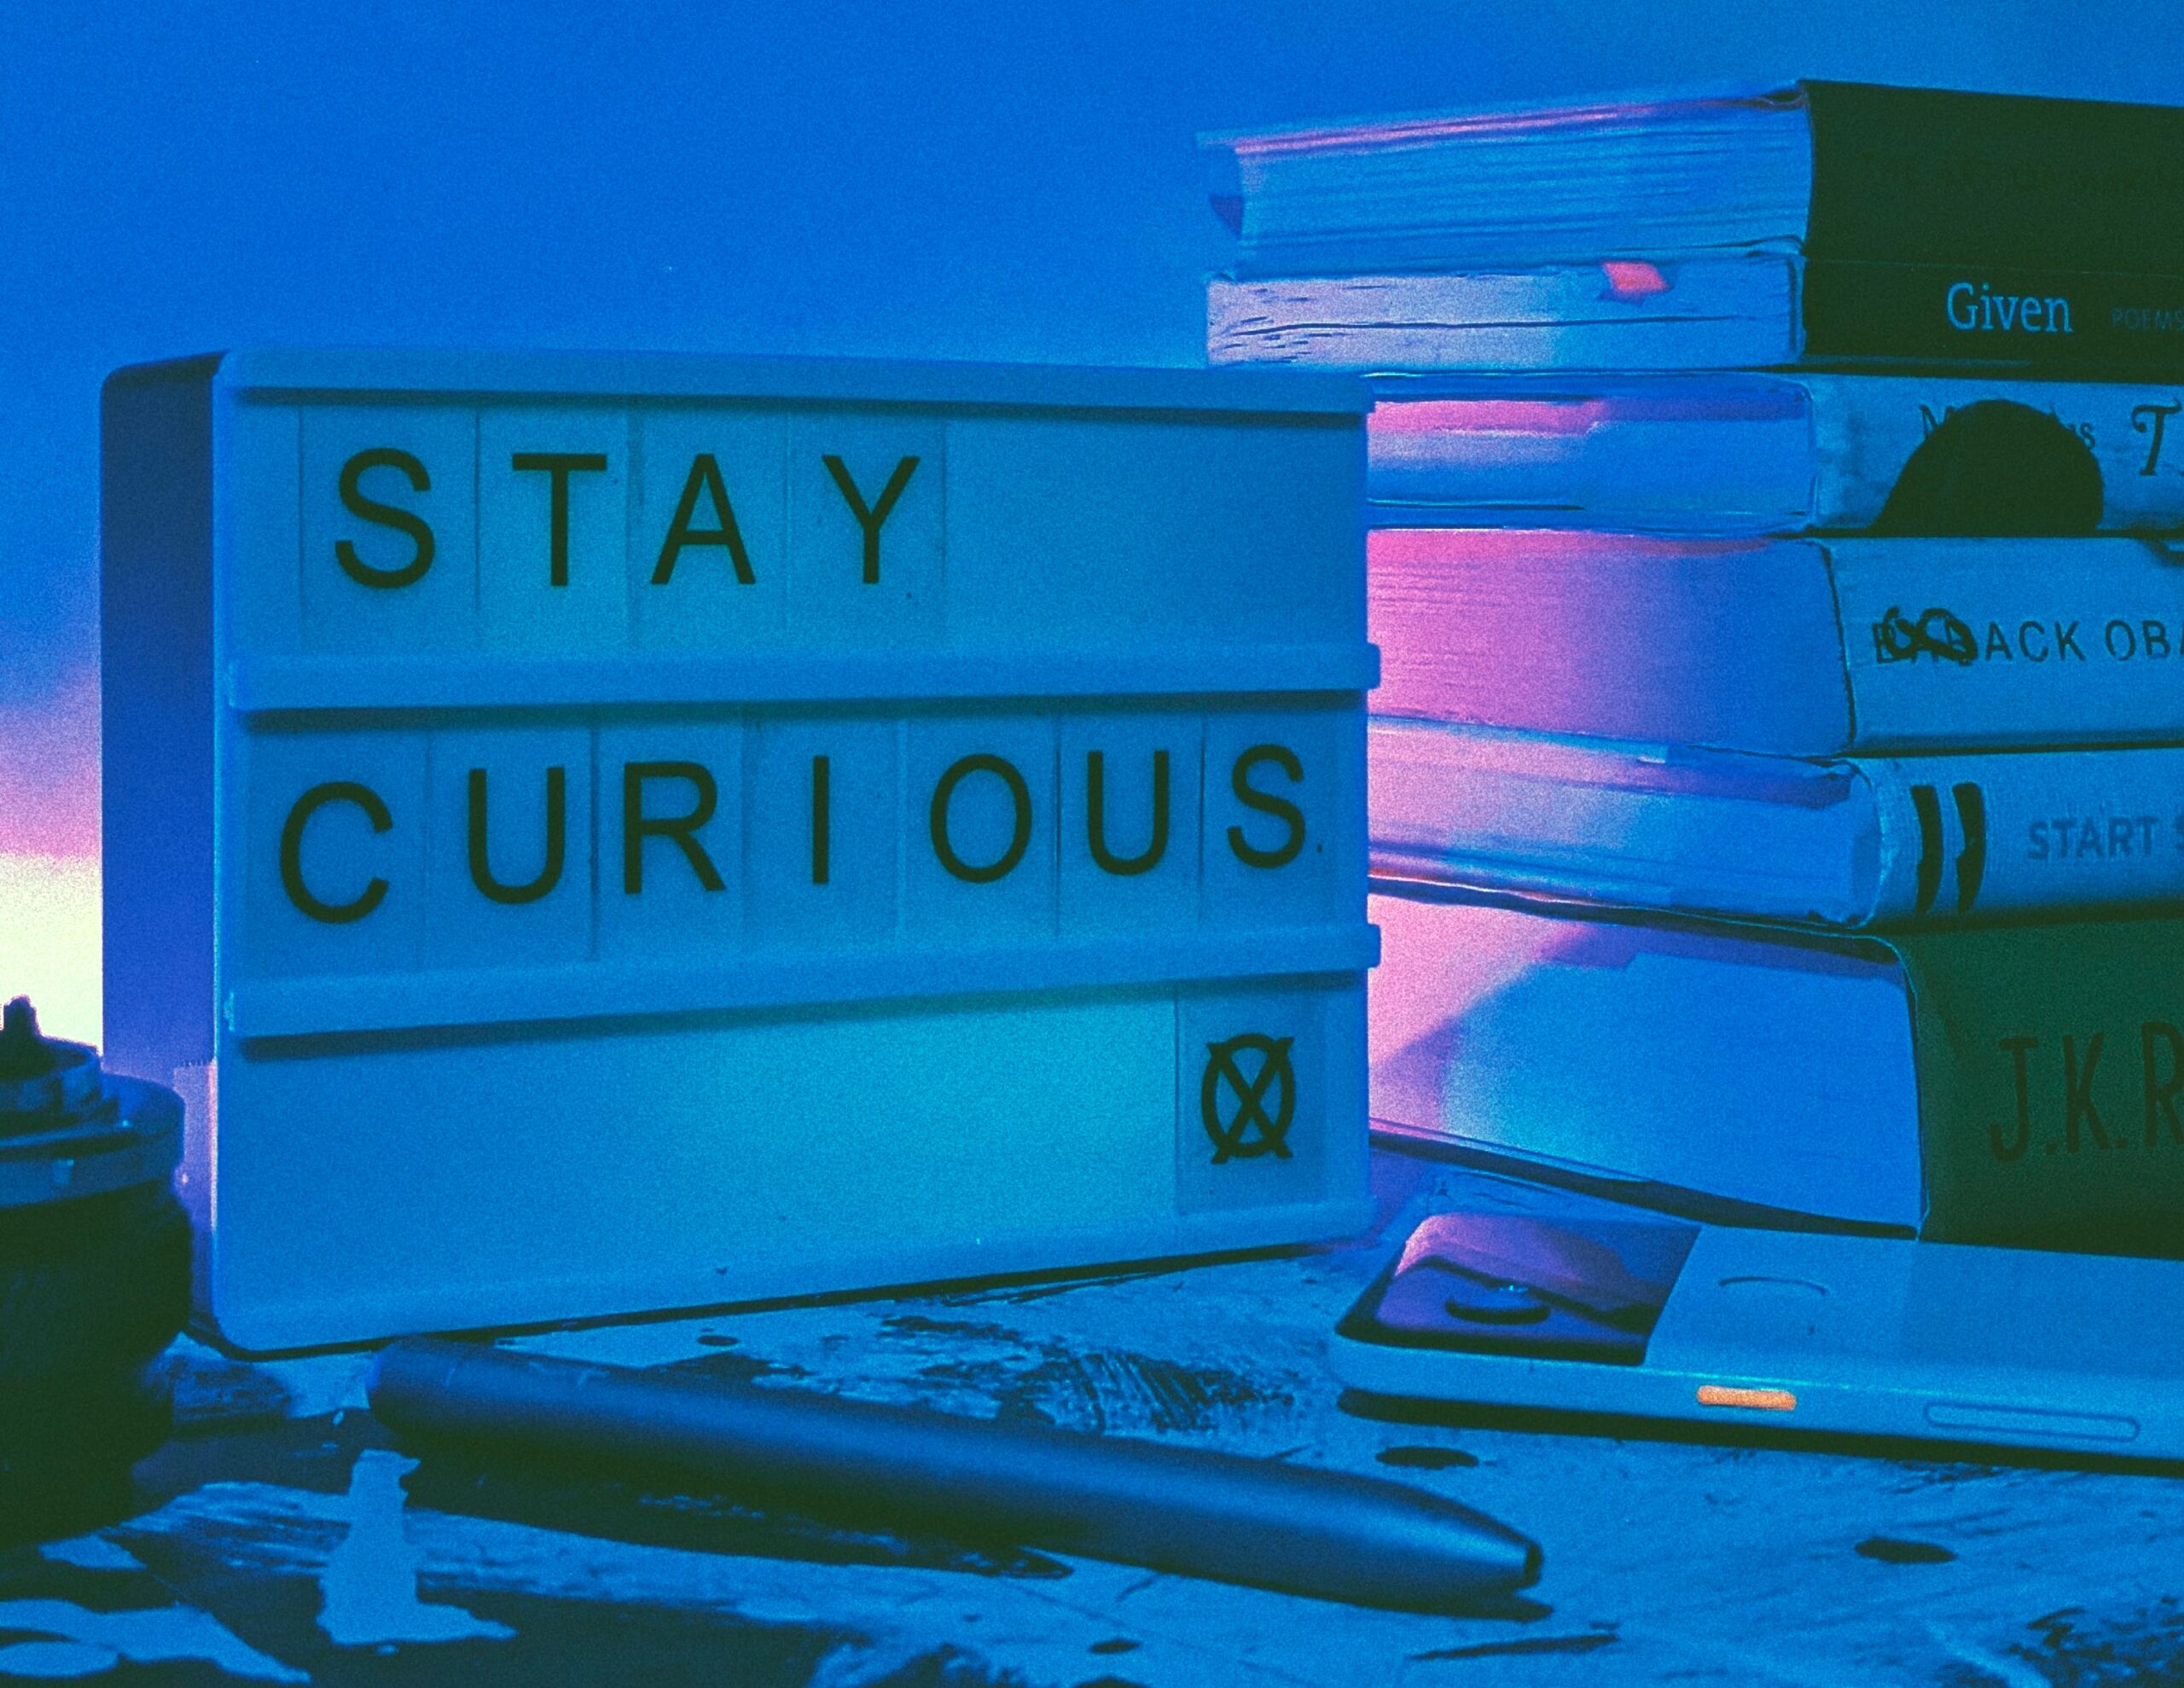 A stack of books and a light up sign that says Stay Curious